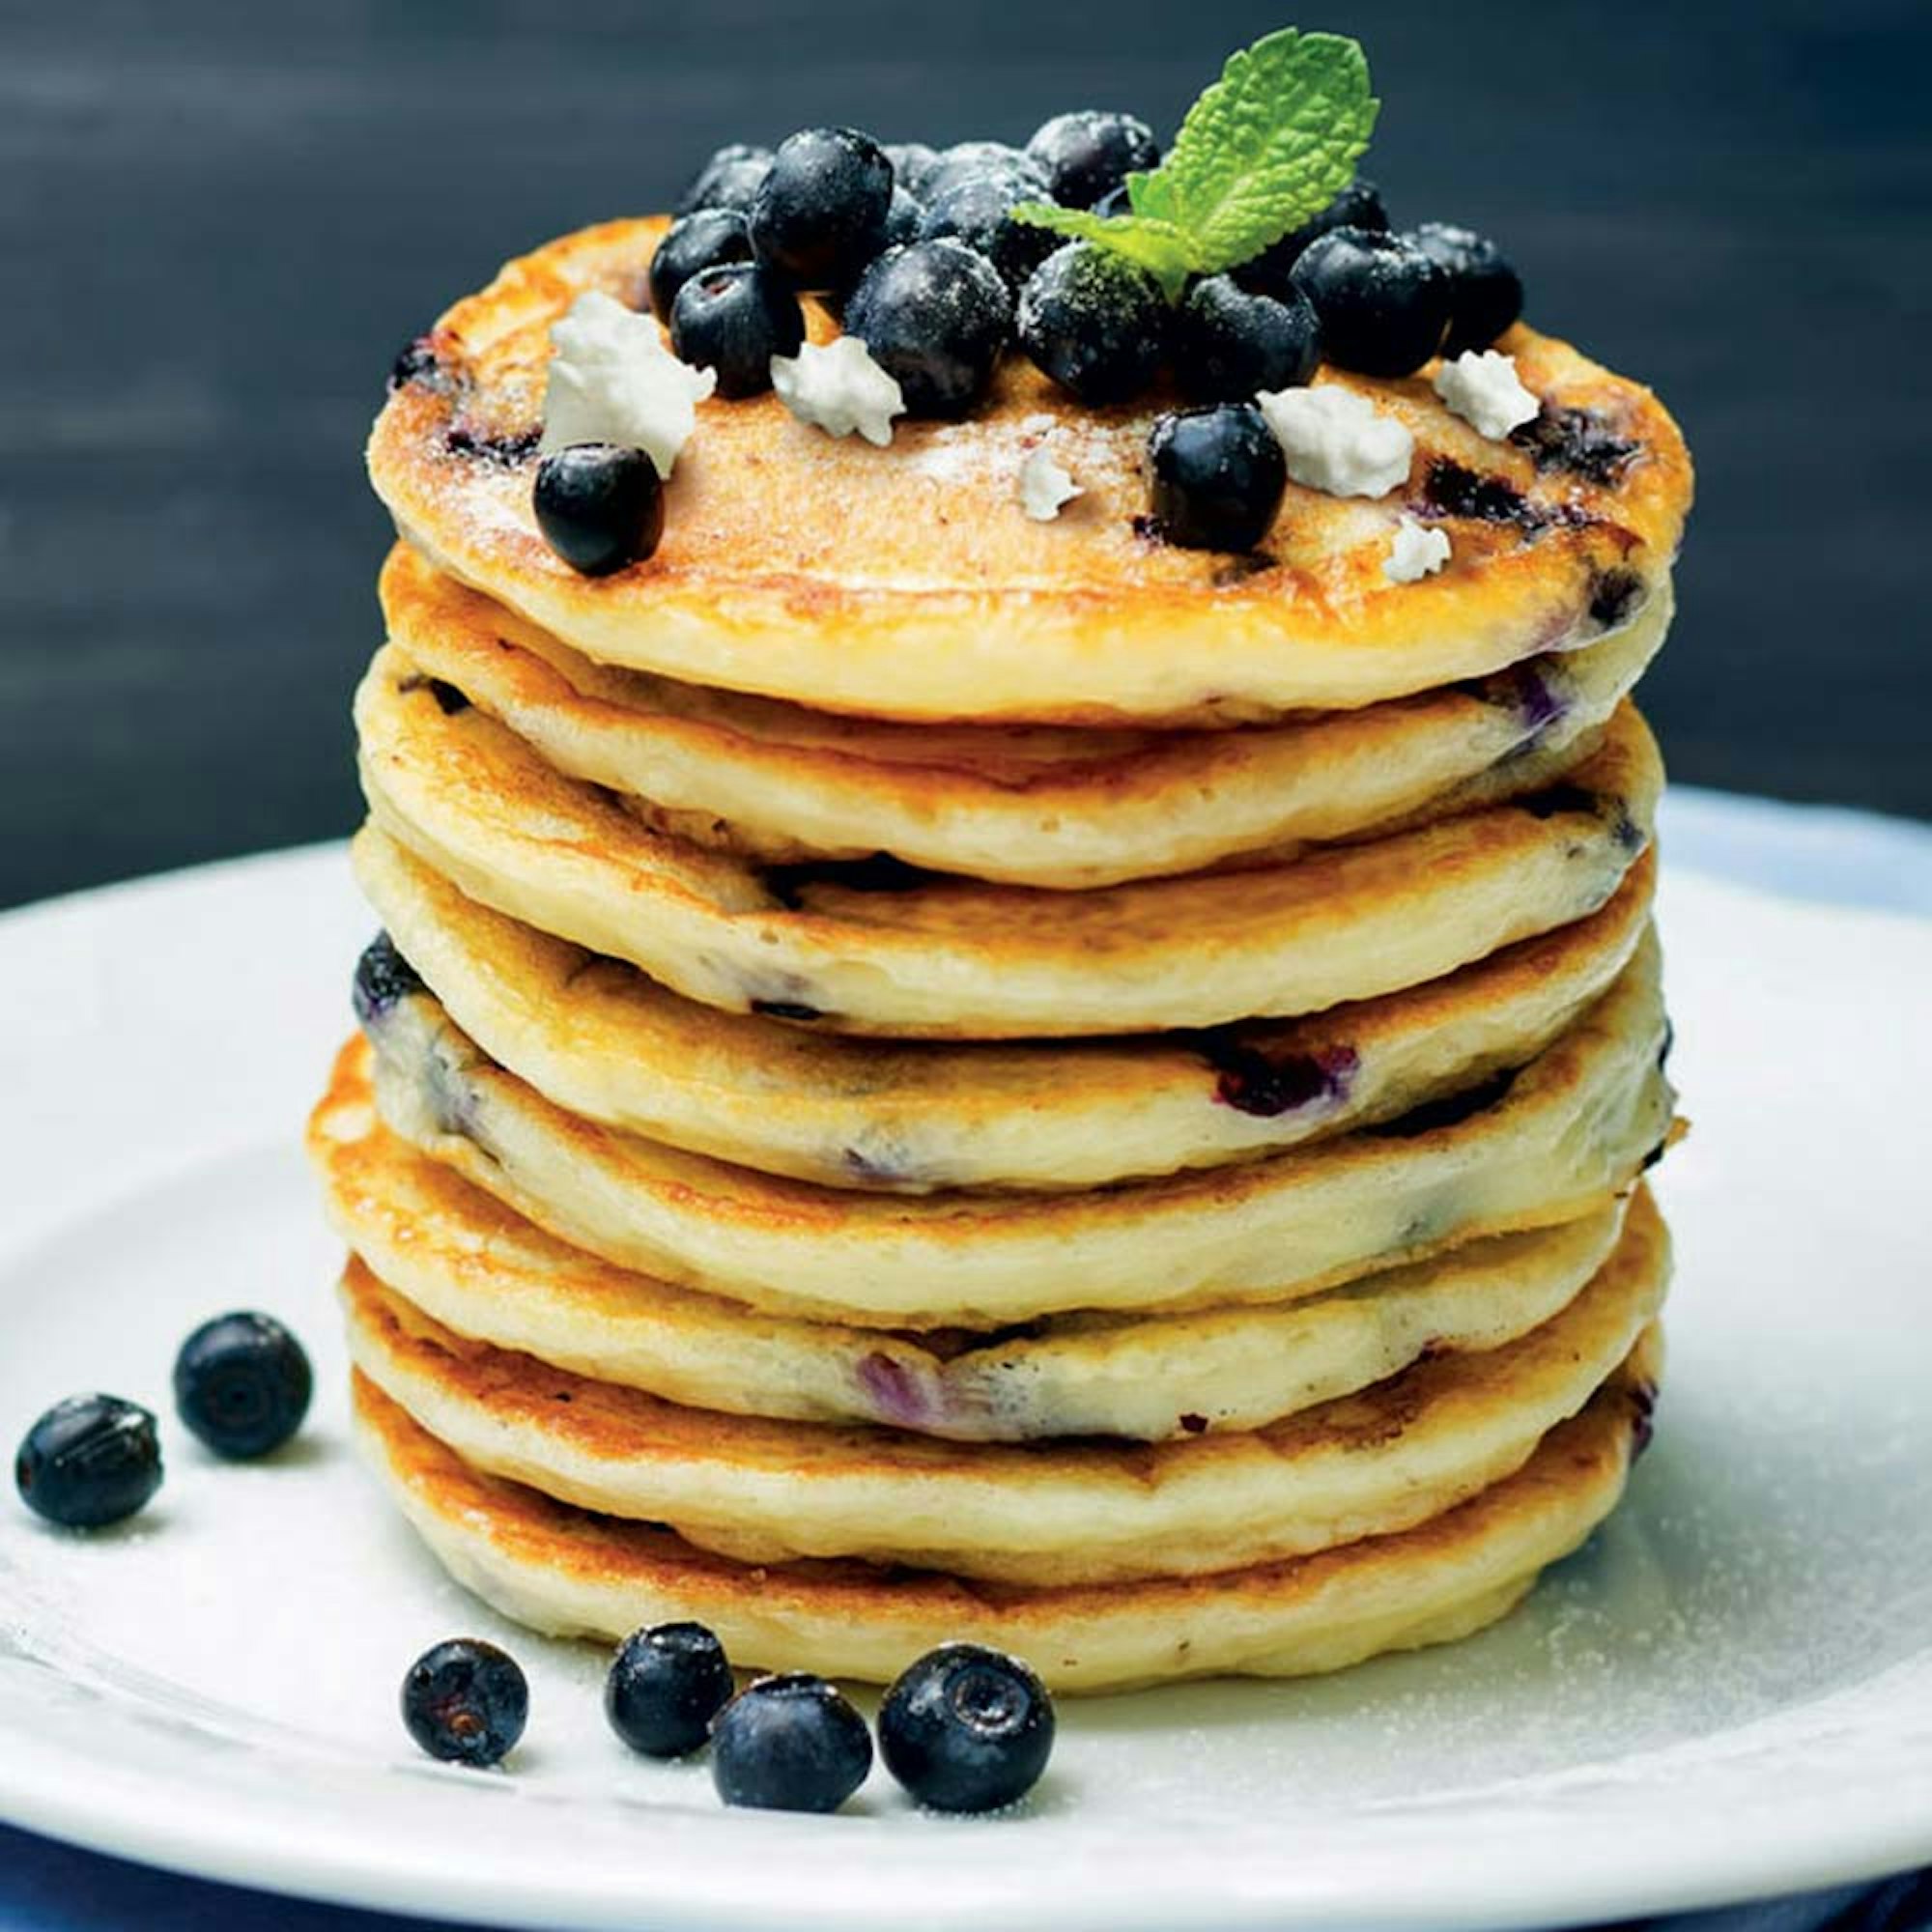 Contact Grill Pillowy Blueberry & Ricotta Pancakes recipe | House blog